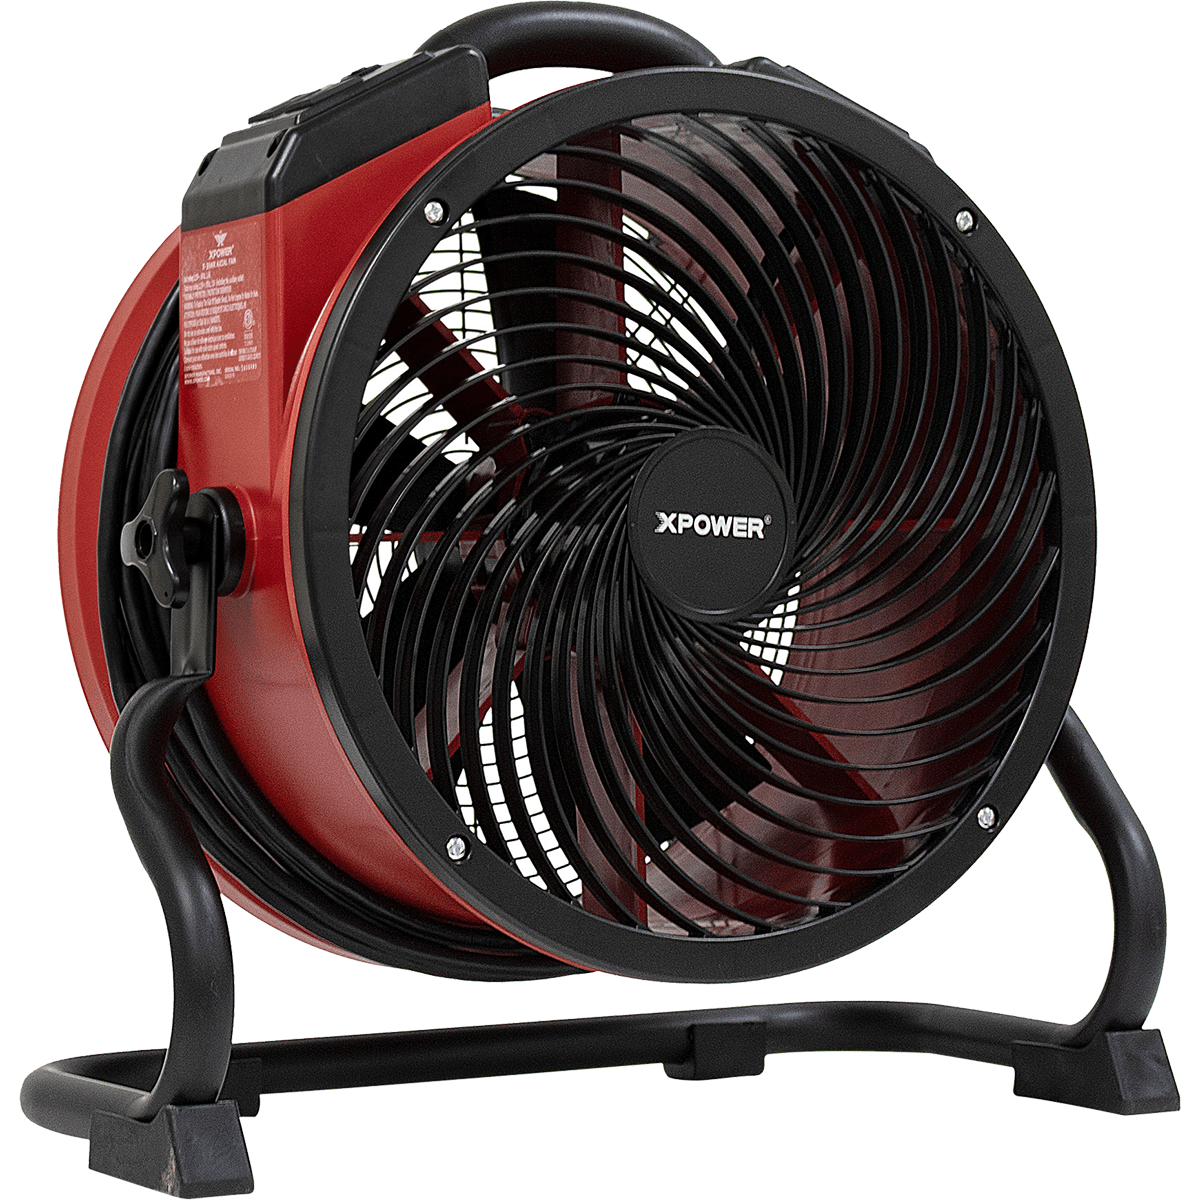 XPOWER 2100 CFM X-39AR Professional Sealed Motor Axial Fan - Red